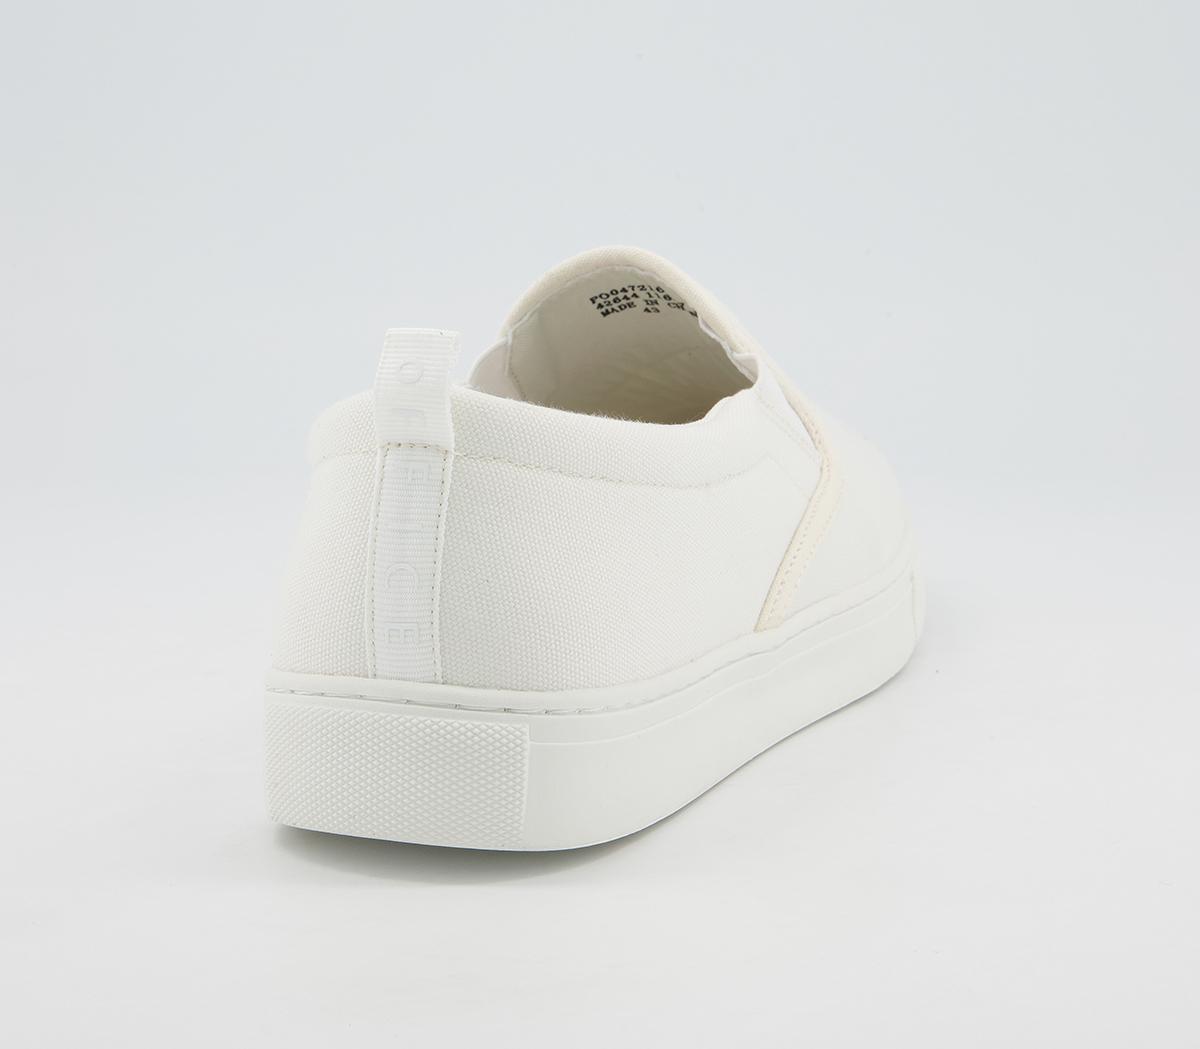 OFFICE Cane Canvas Trainers Off White Canvas - Men's Casual Shoes